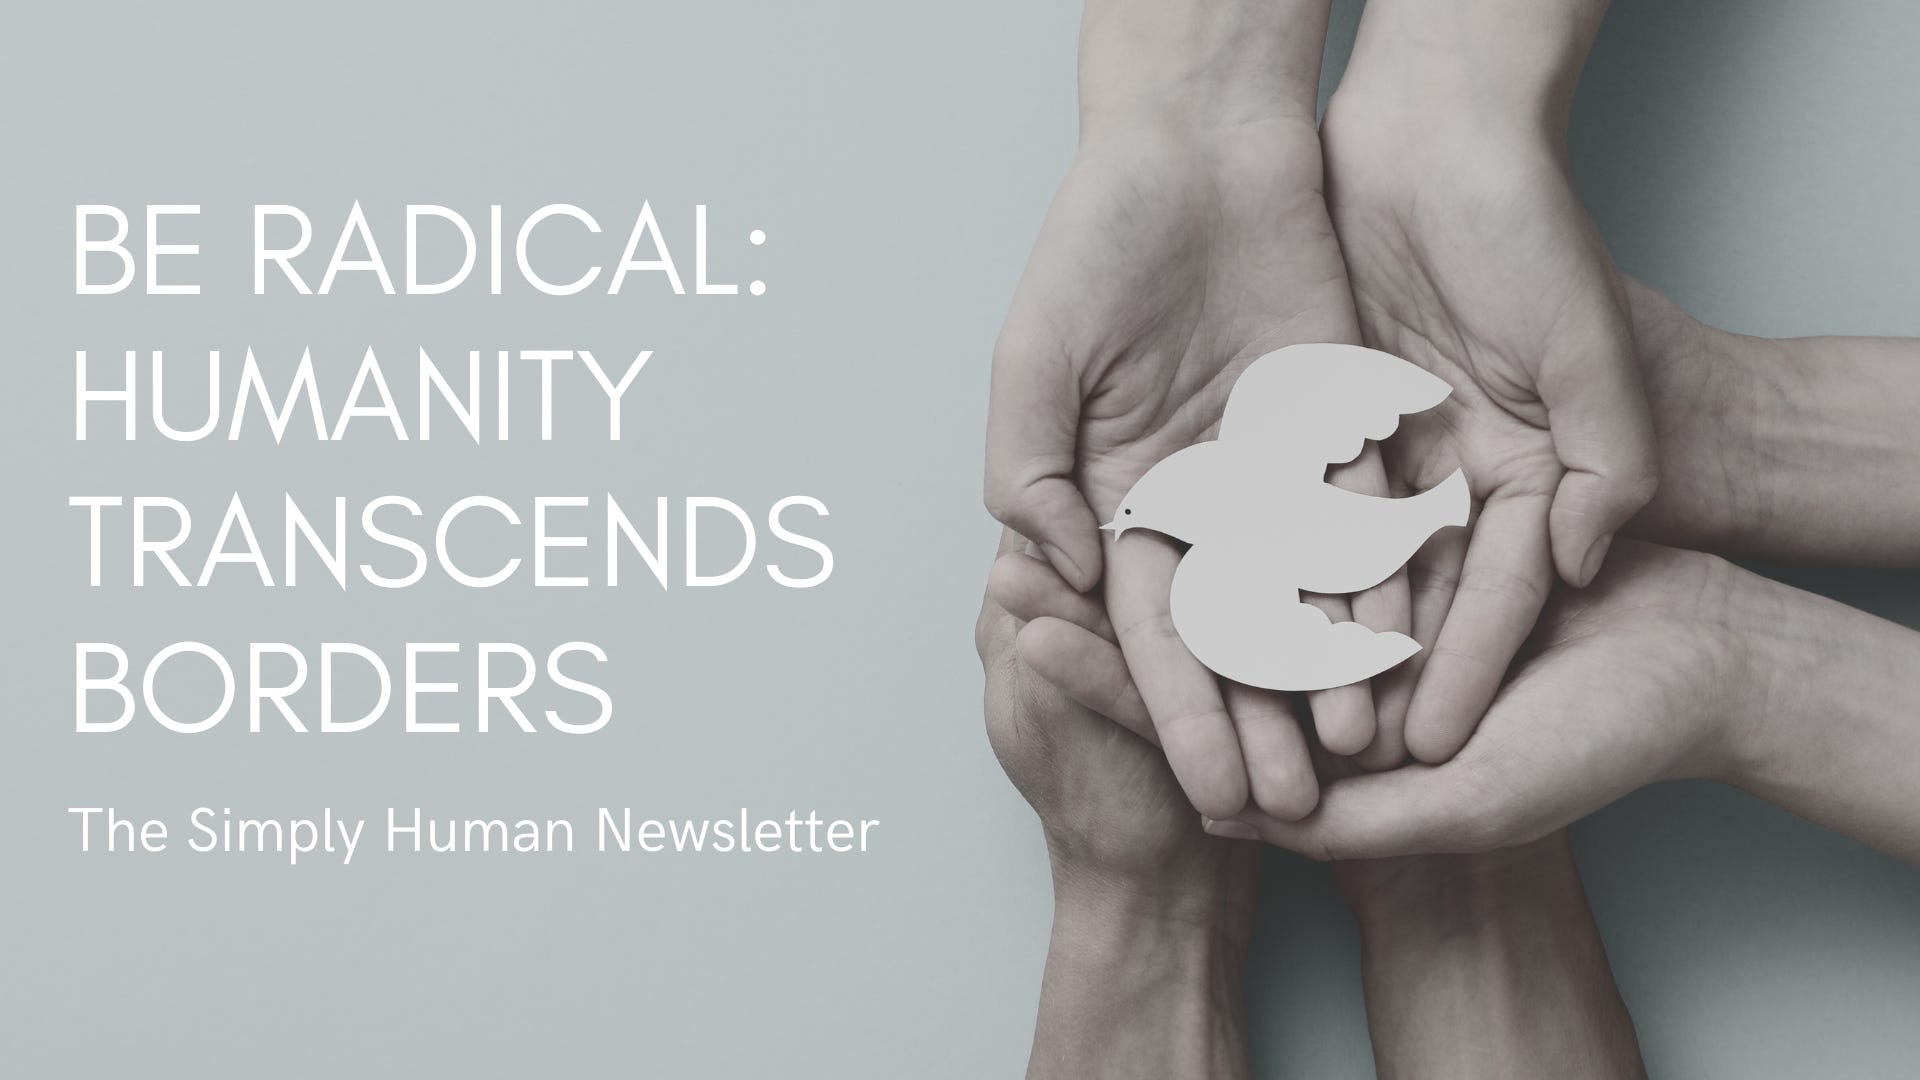 be radical: humanity transcends borders. The simply human newsletter by Ivan Palomino and Zuleka Kaysan